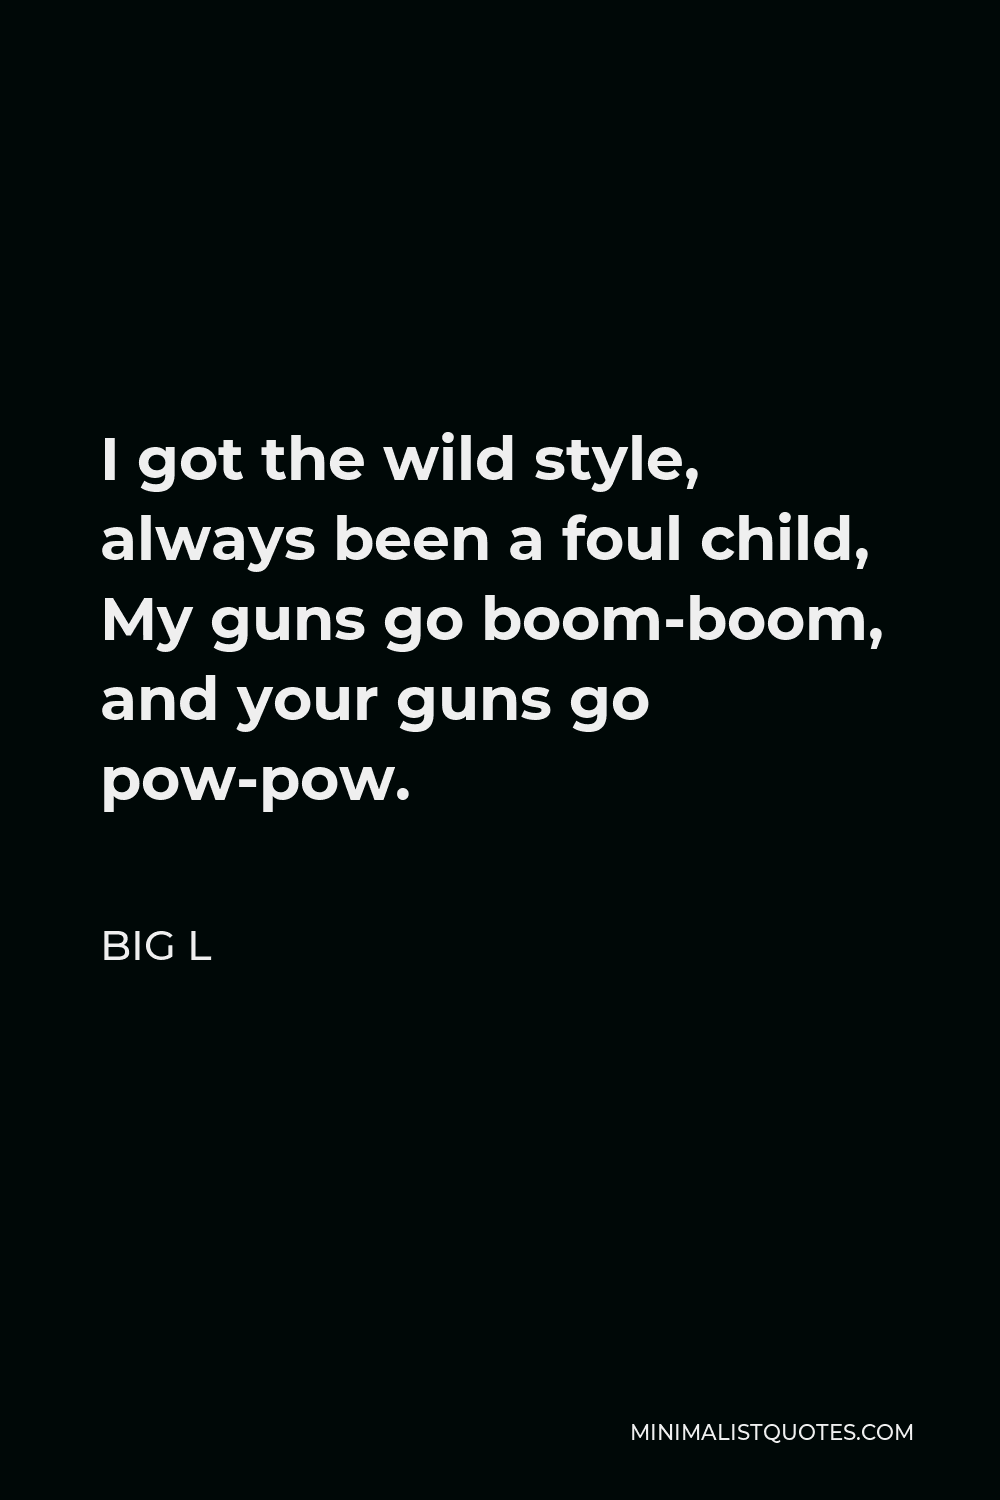 Big L Quote - I got the wild style, always been a foul child, My guns go boom-boom, and your guns go pow-pow.